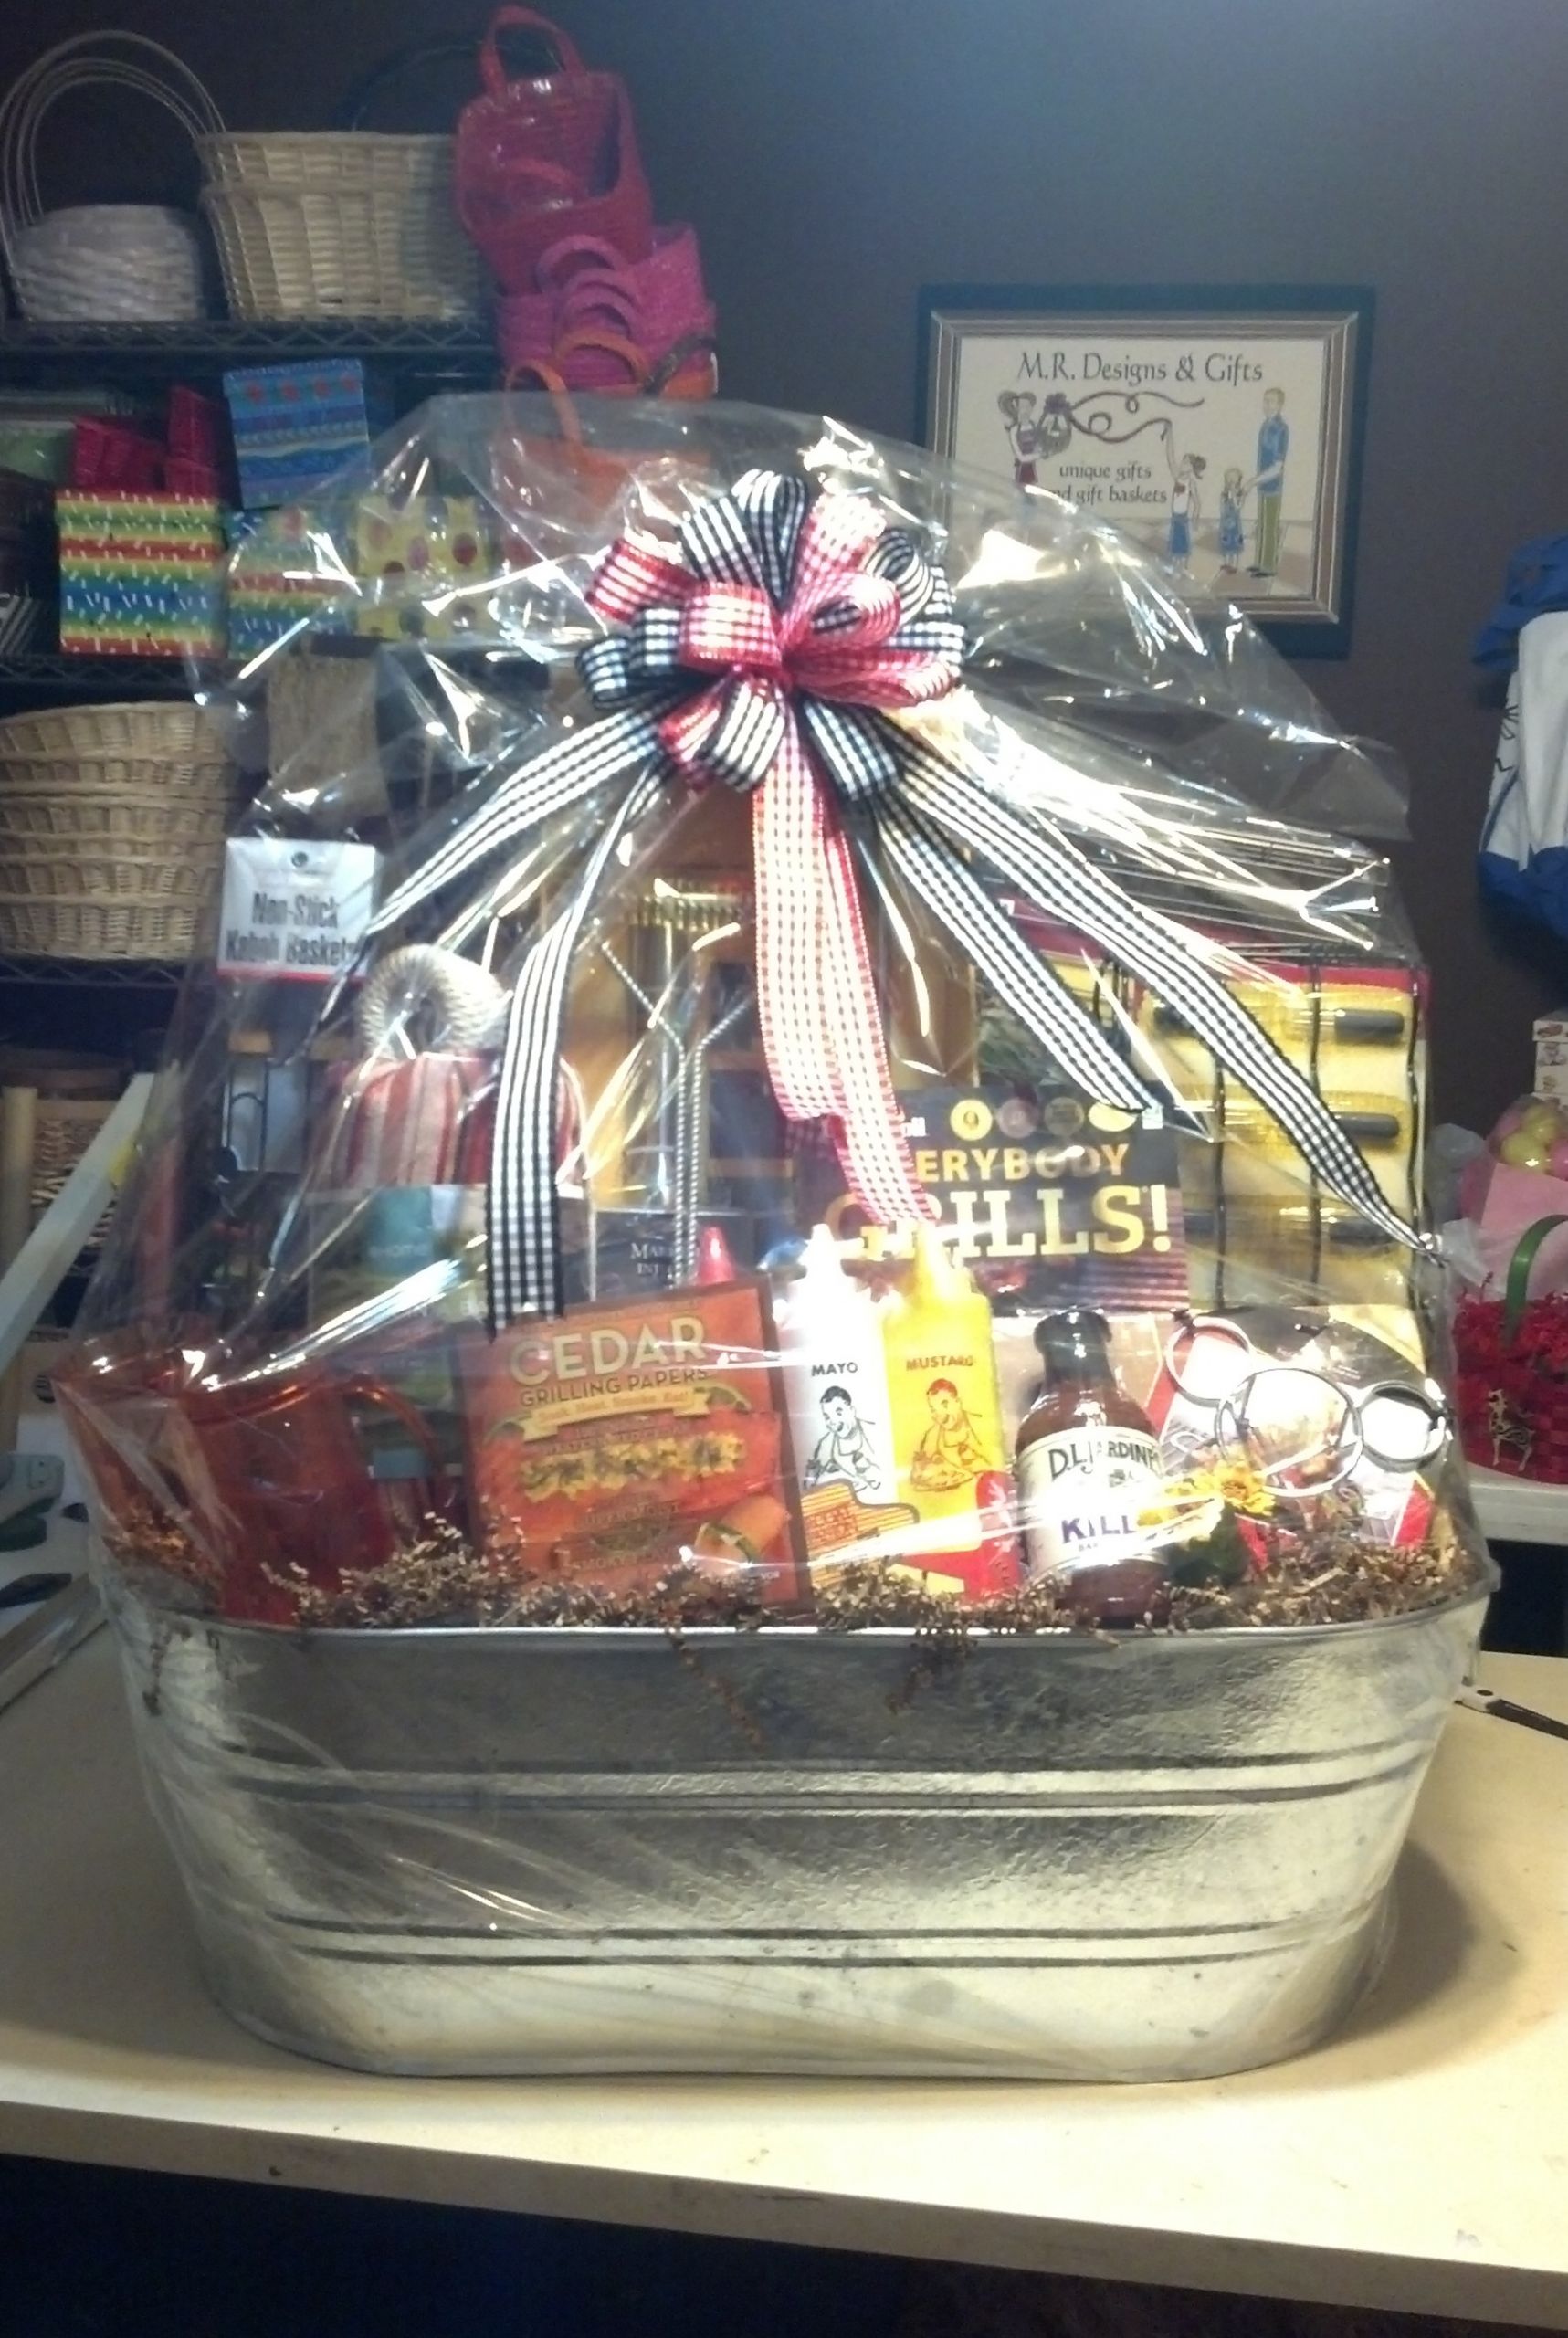 Auction Gift Basket Ideas
 Special Event and Silent Auction Gift Basket Ideas by M R